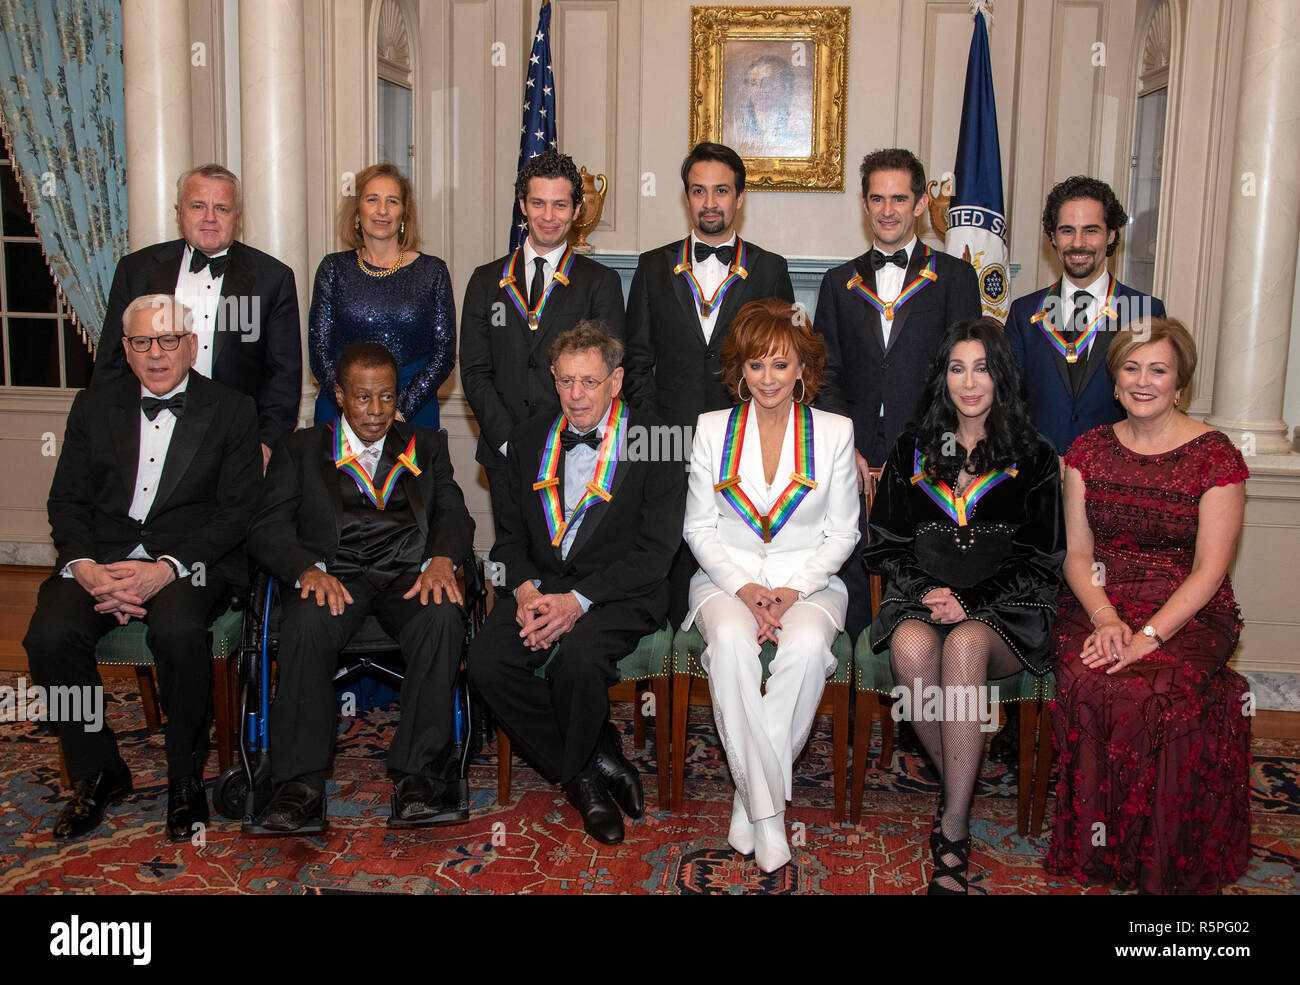 Washington, USA. 1st Dec 2018. The recipients of the 41st Annual Kennedy Center Honors pose for a group photo following a dinner hosted by United States Deputy Secretary of State John J. Sullivan in their honor at the US Department of State in Washington, DC on Saturday, December 1, 2018. Credit: MediaPunch Inc/Alamy Live News Stock Photo